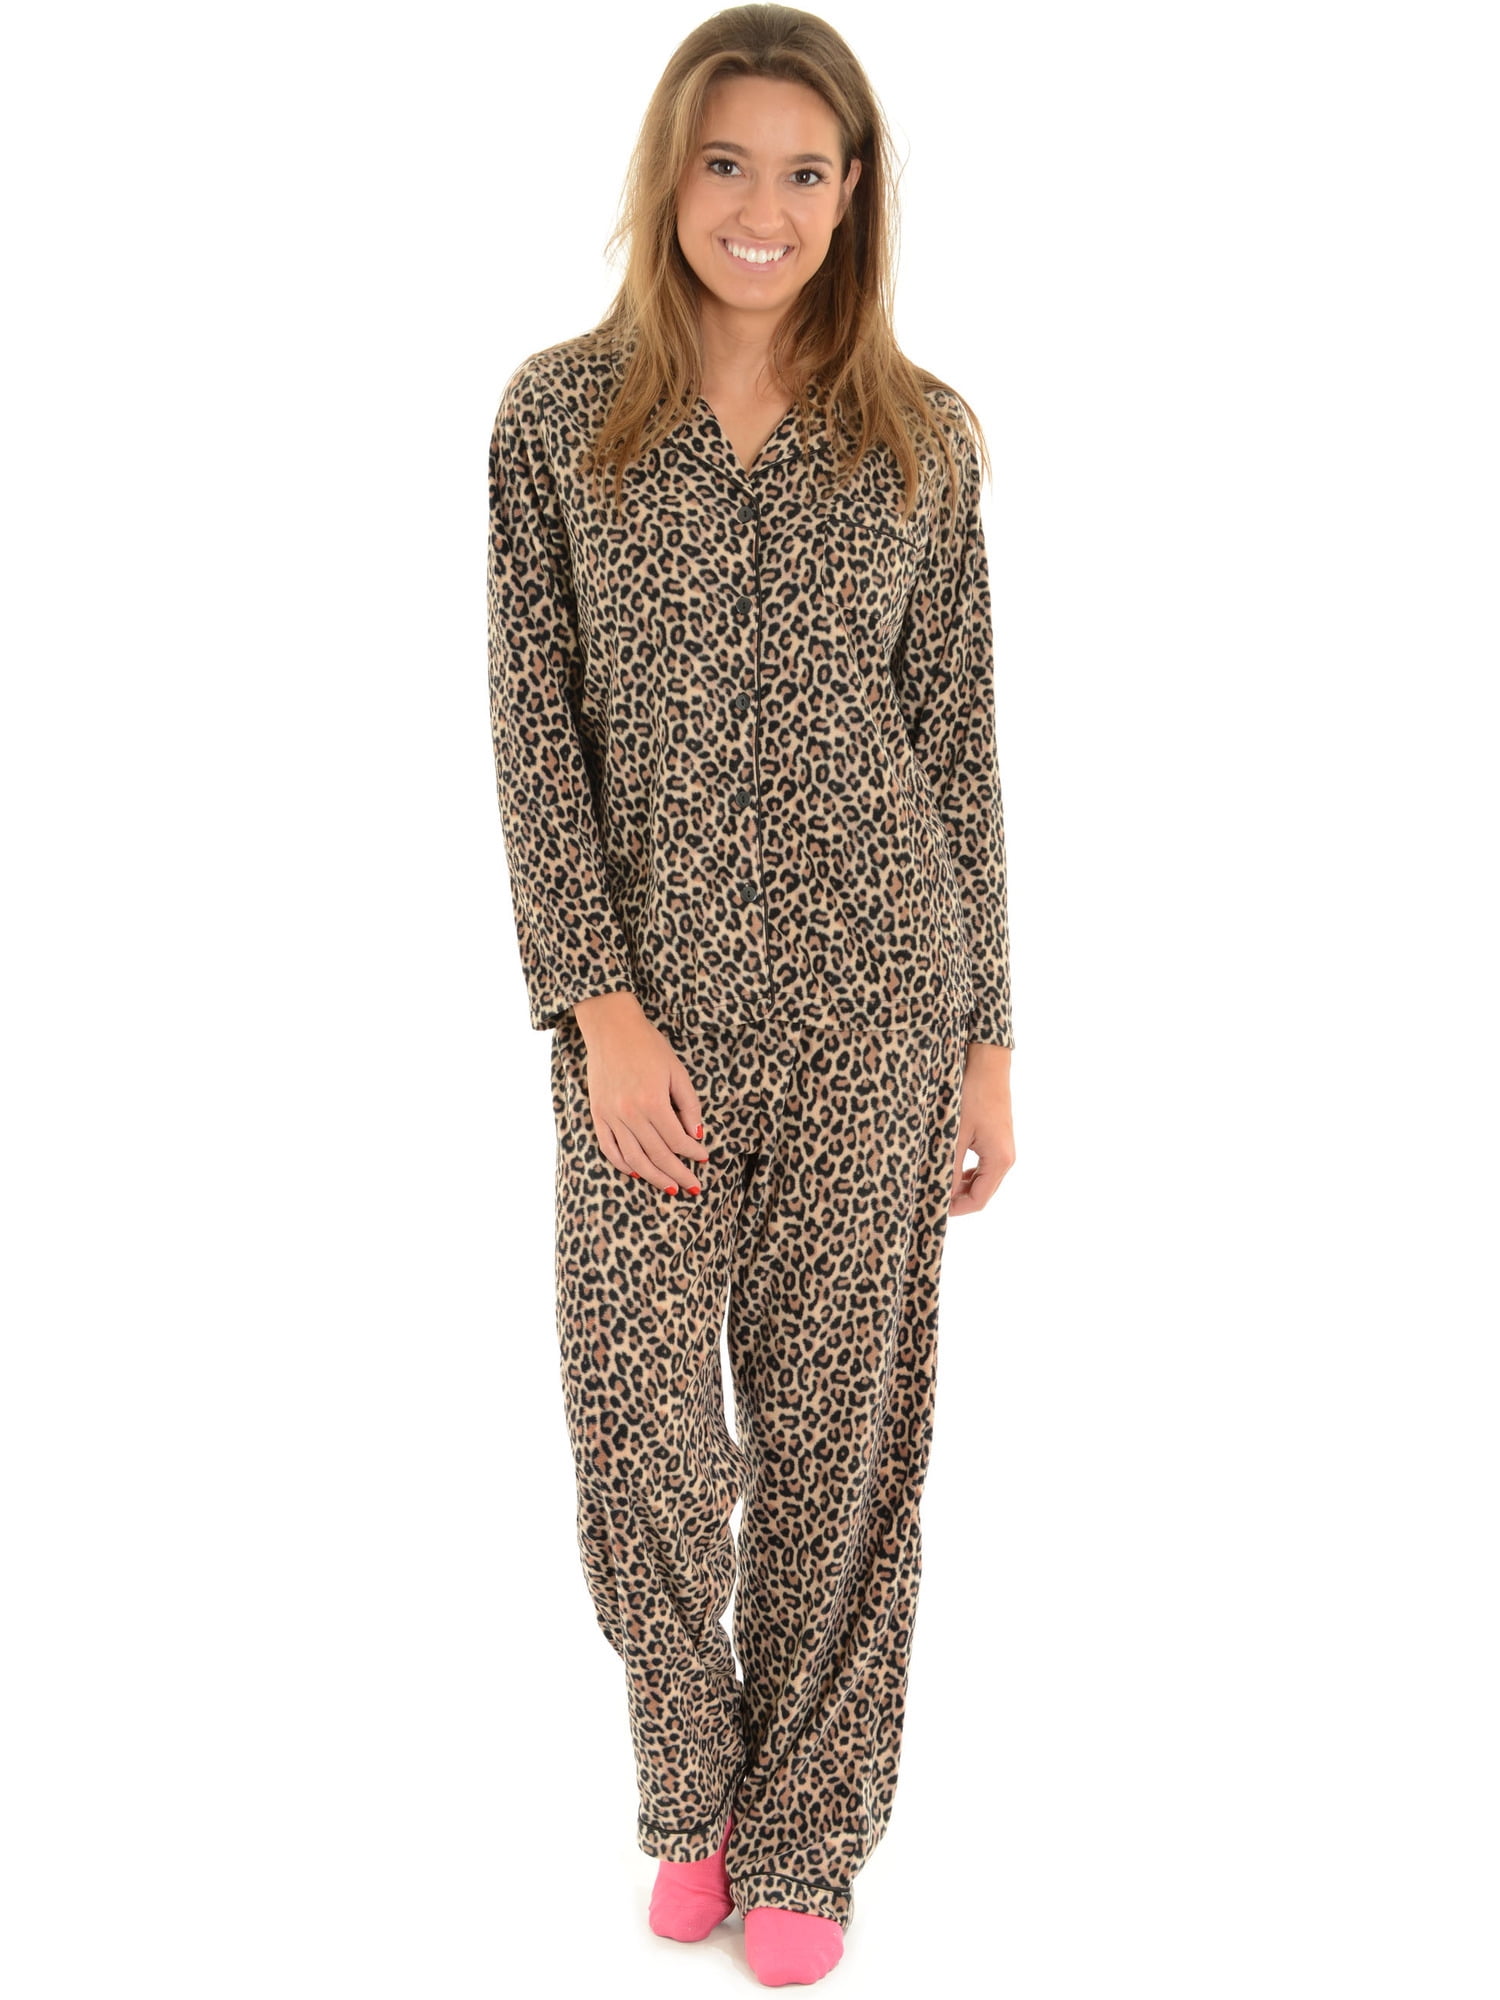 Int Intimate - Womens 2 Piece Leopard Pajamas Set Soft and Comfy Micro ...